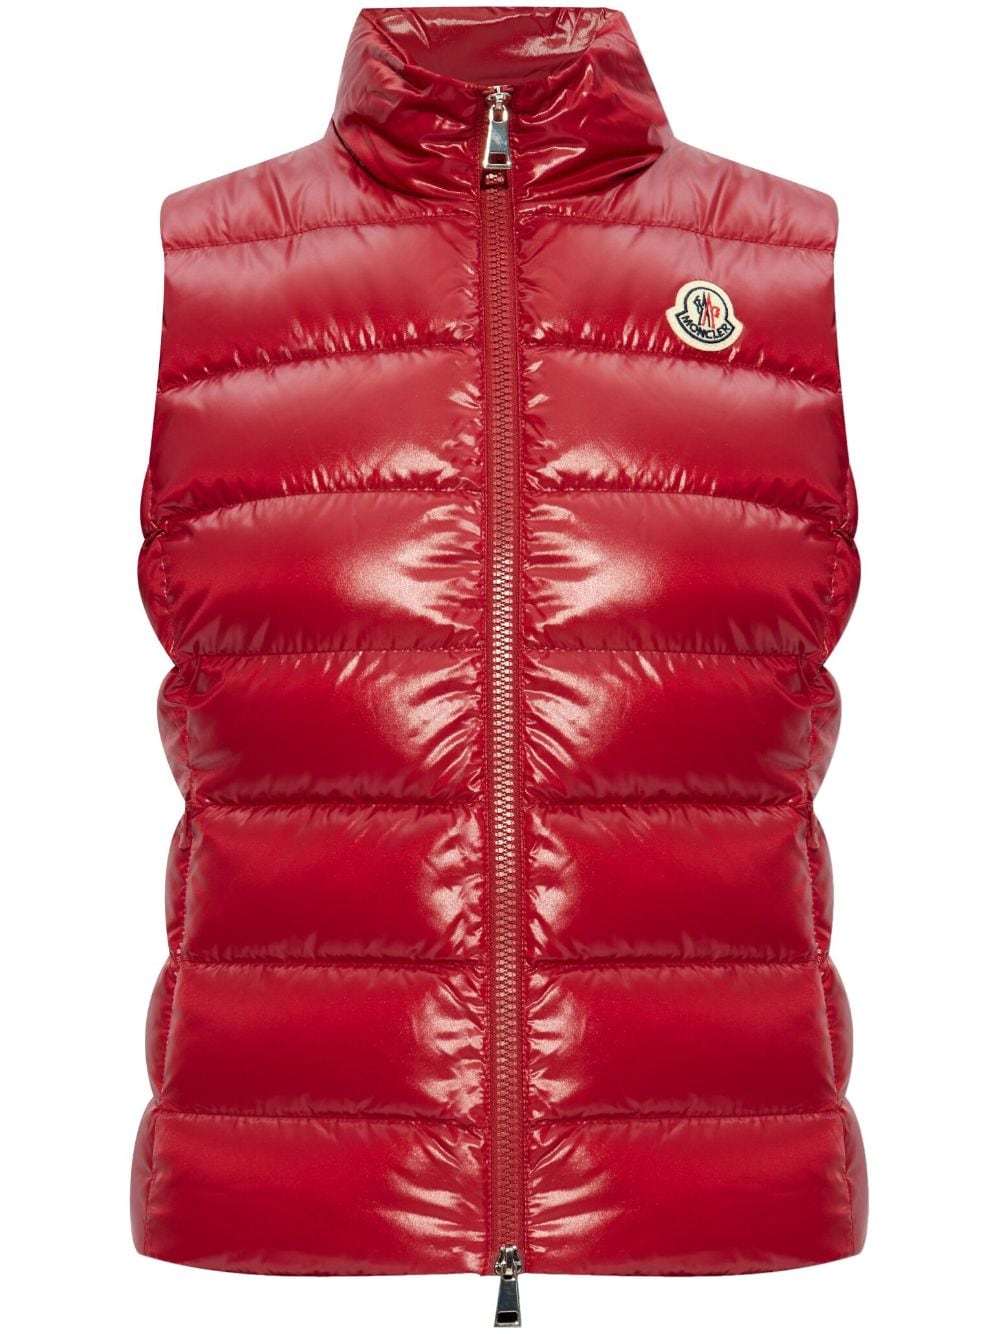 Moncler stand-up collar logo patch gilet - Red von Moncler